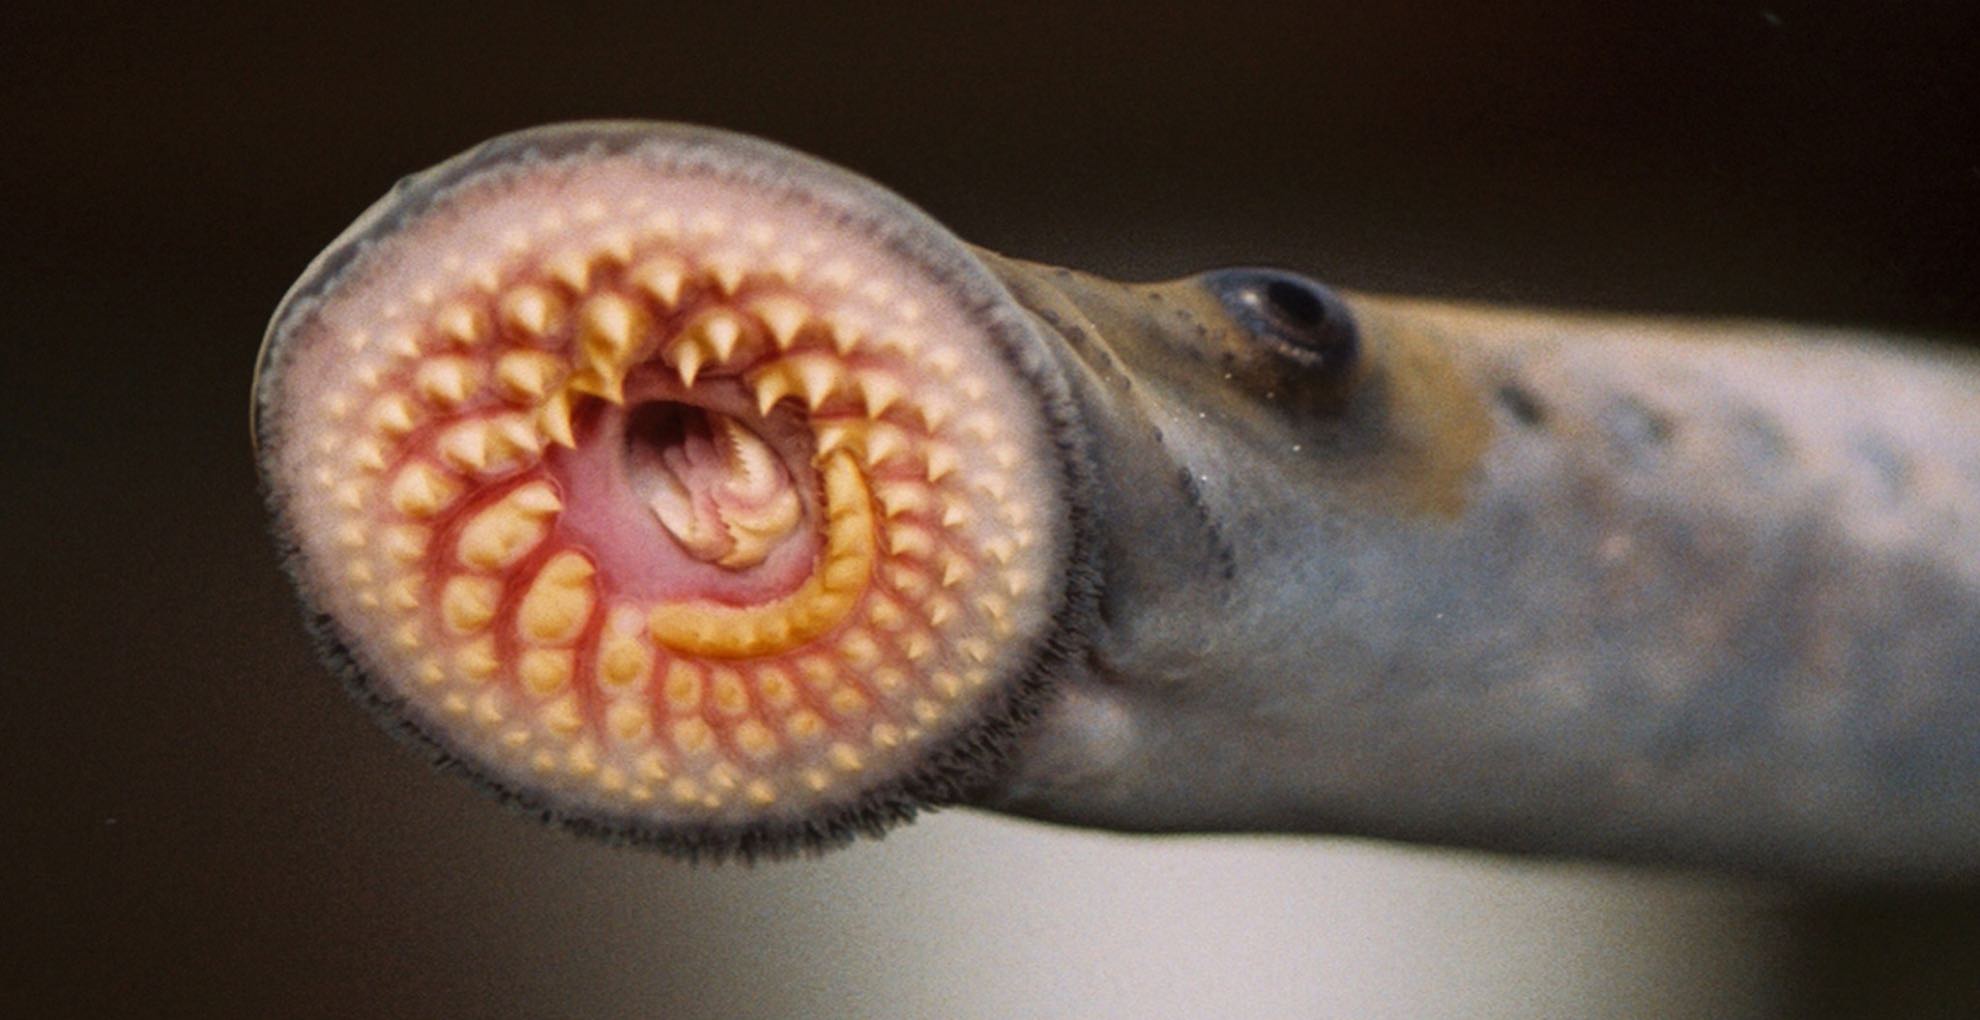 Experts predict there will be at least a temporary surge to lamprey populations in the lakes following a dip in control efforts during the early stages of the Covid-19 pandemic.